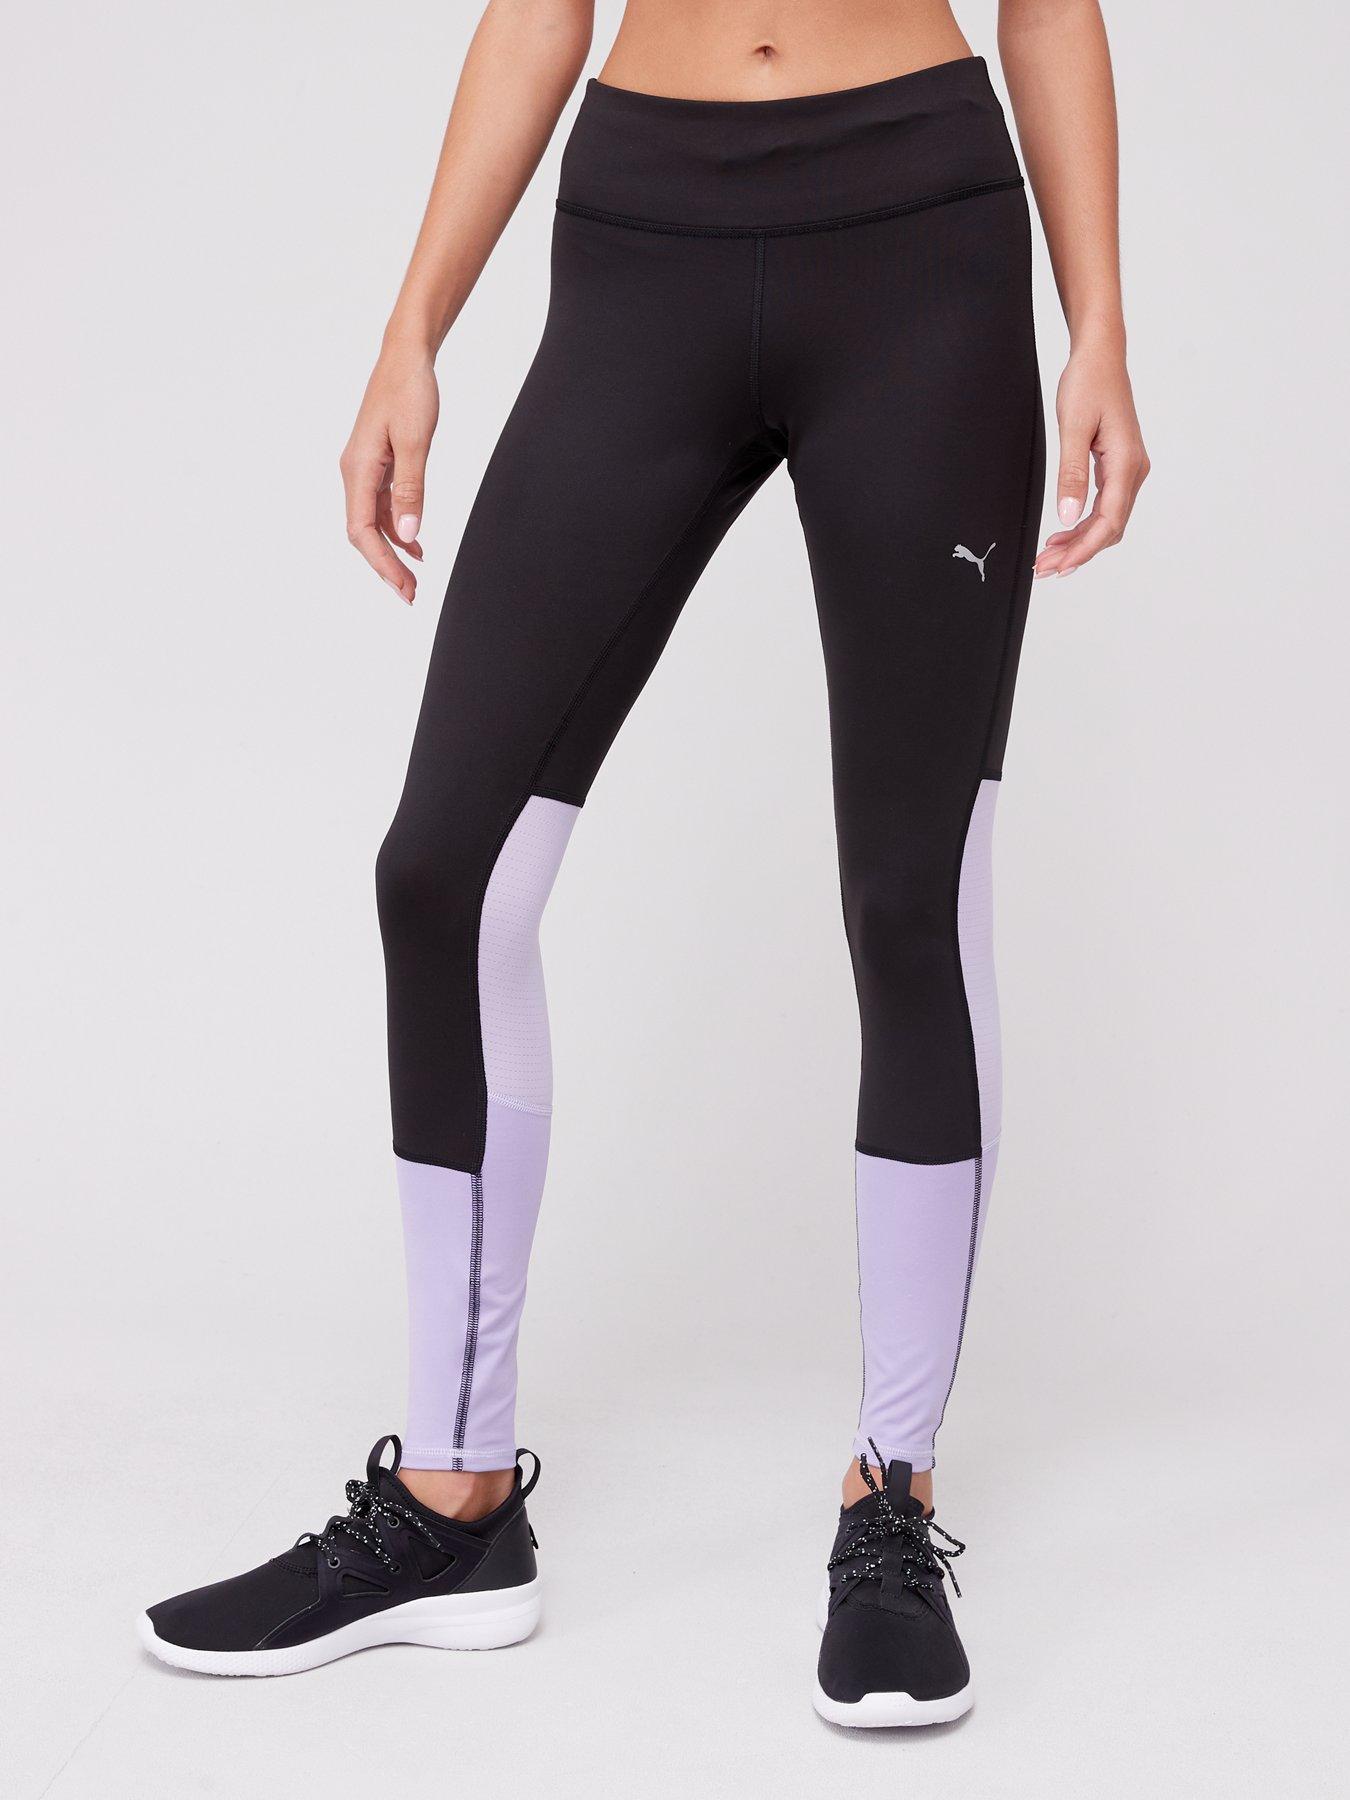 Buy Puma Women's Regular Pants Tights Trousers (51317001_Black_S) Online at  Lowest Price Ever in India | Check Reviews & Ratings - Shop The World